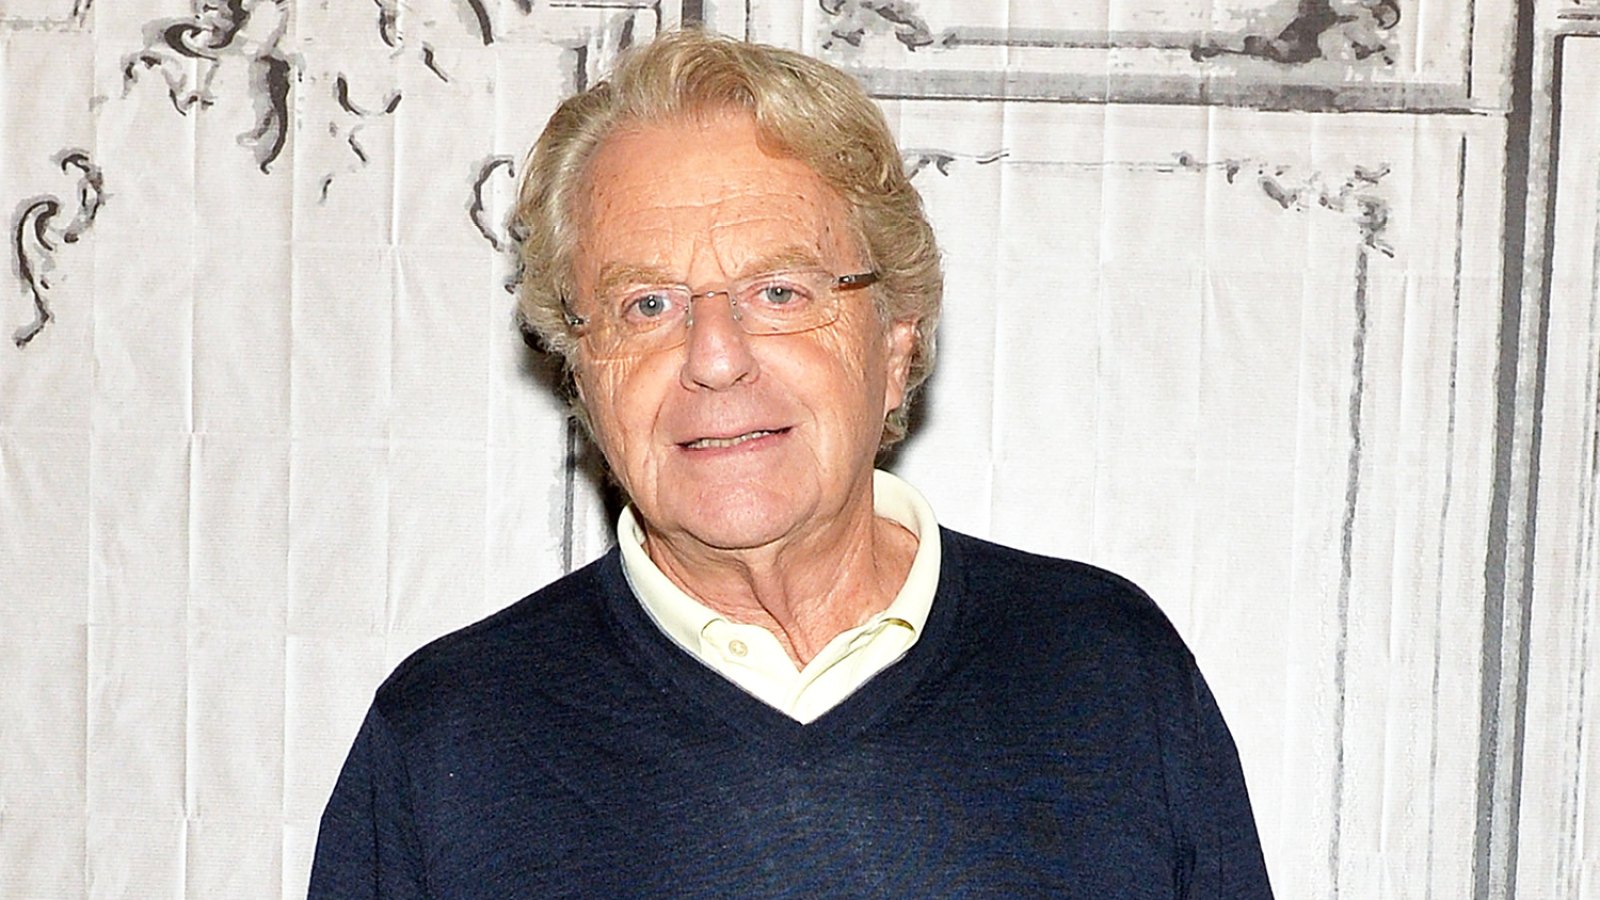 Jerry Springer visits AOL Build to discuss 25 years of his TV show at AOL Studios In New York on May 19, 2016 in New York City.